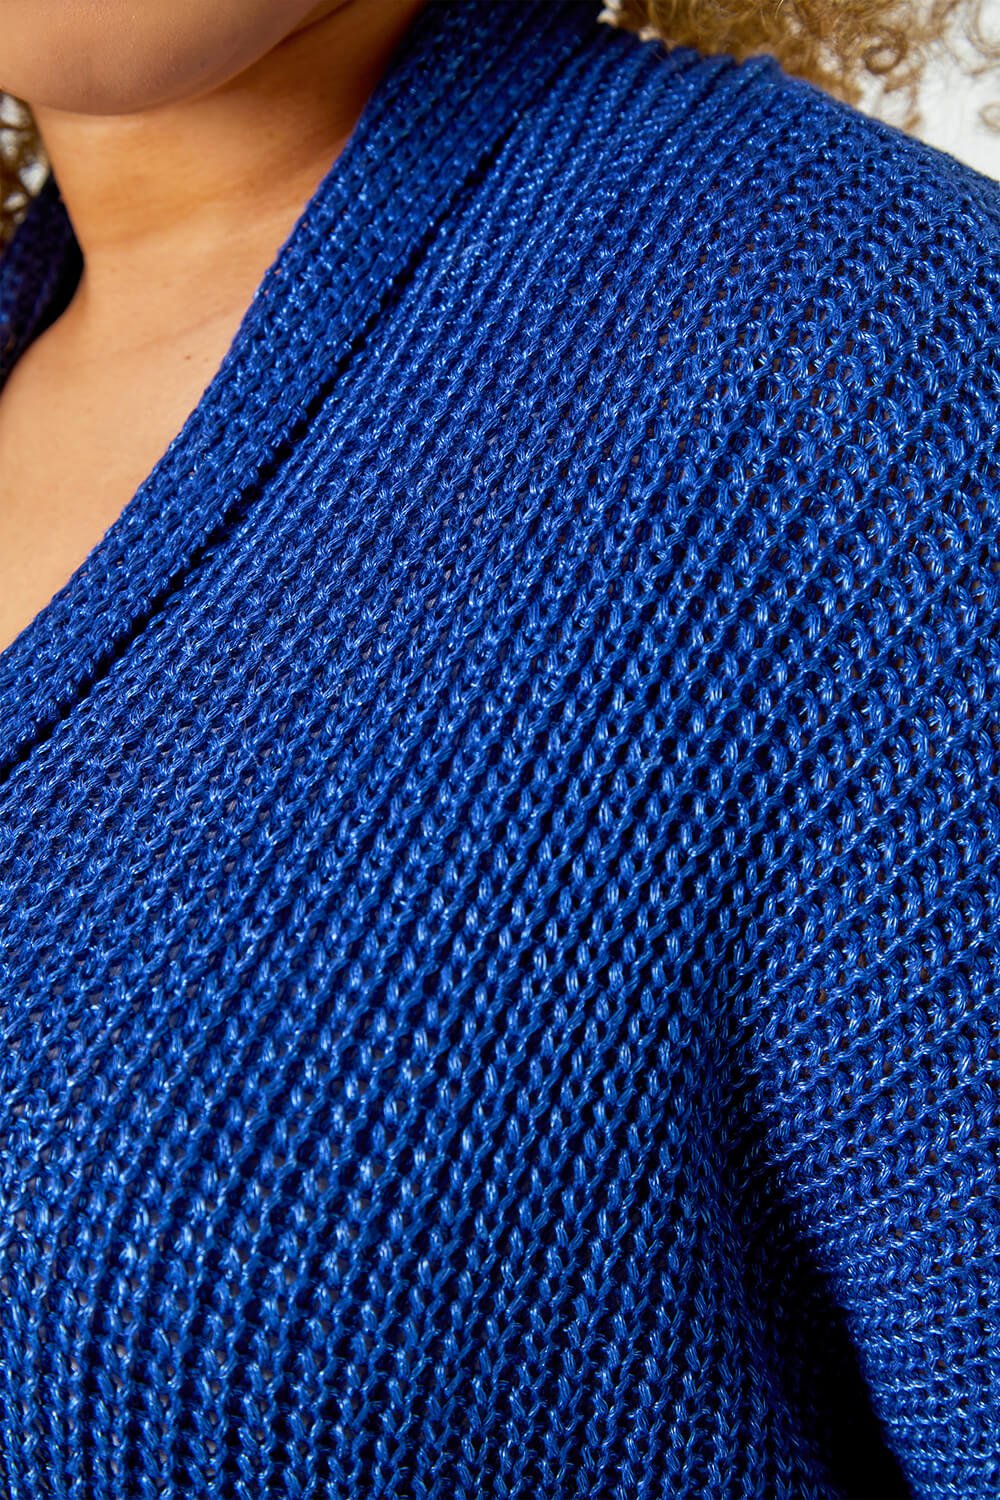 Denim Curve Relaxed Knit Soft Shrug, Image 5 of 5